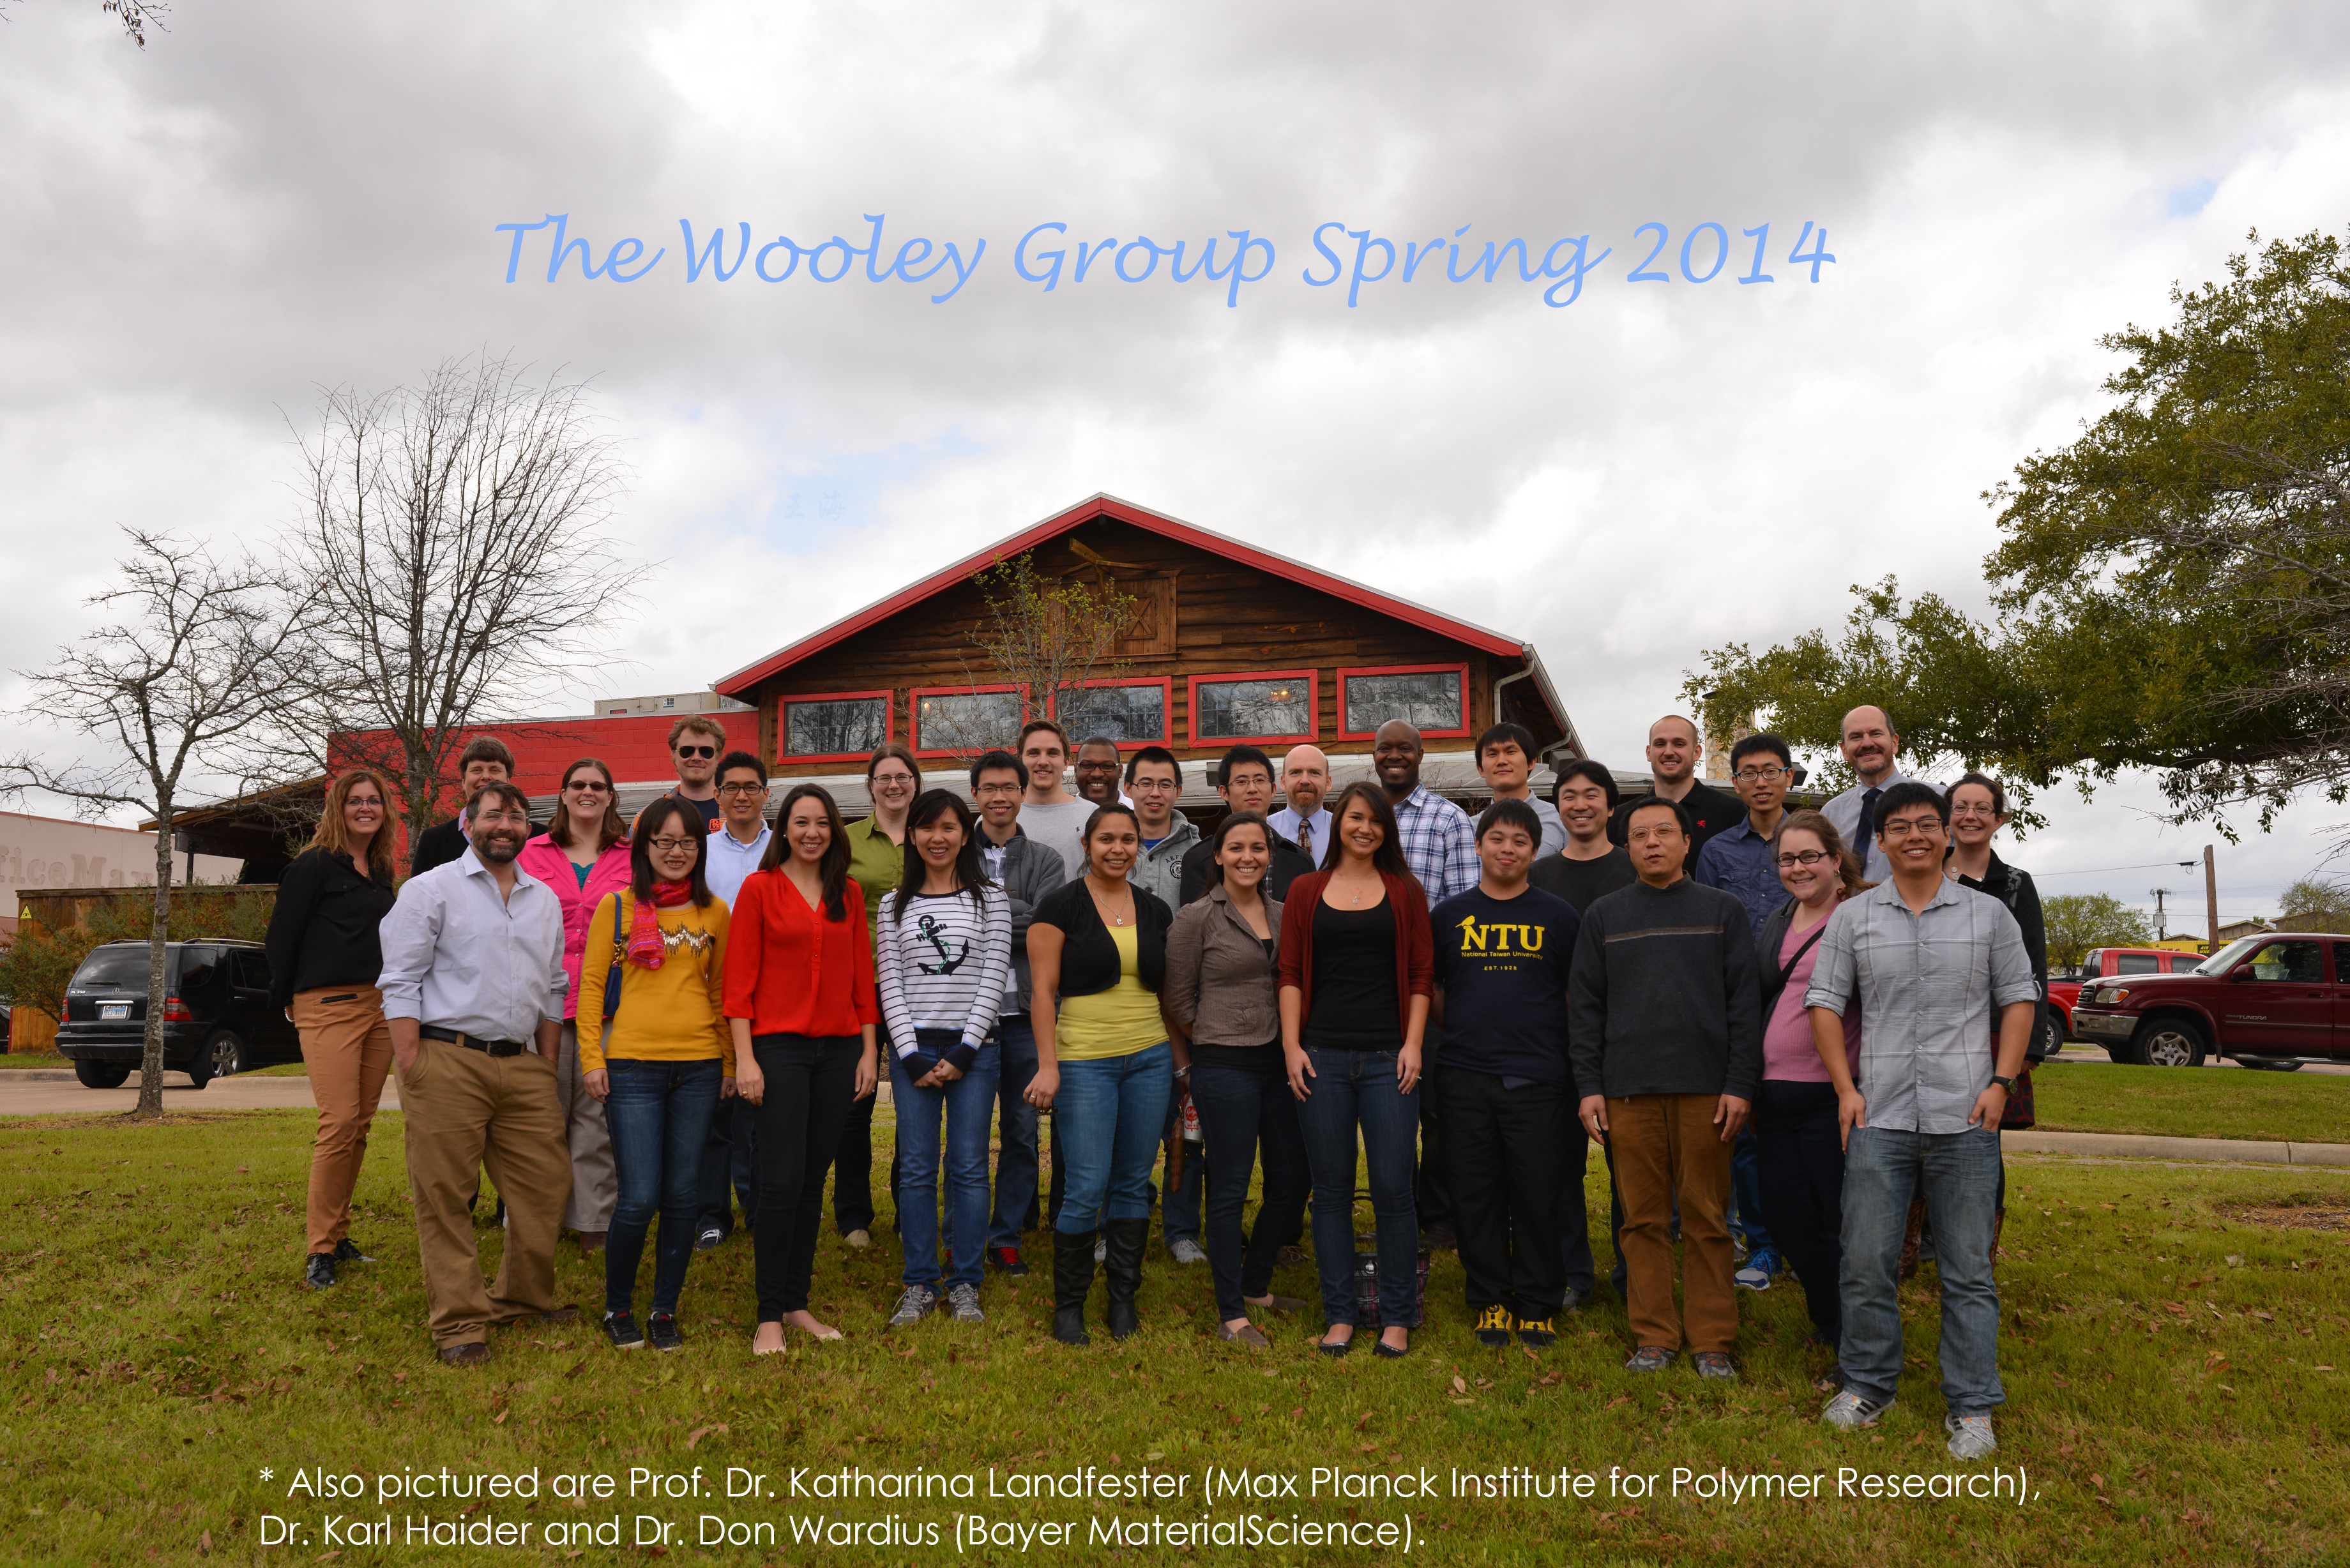 Wooley Group, Spring 2014